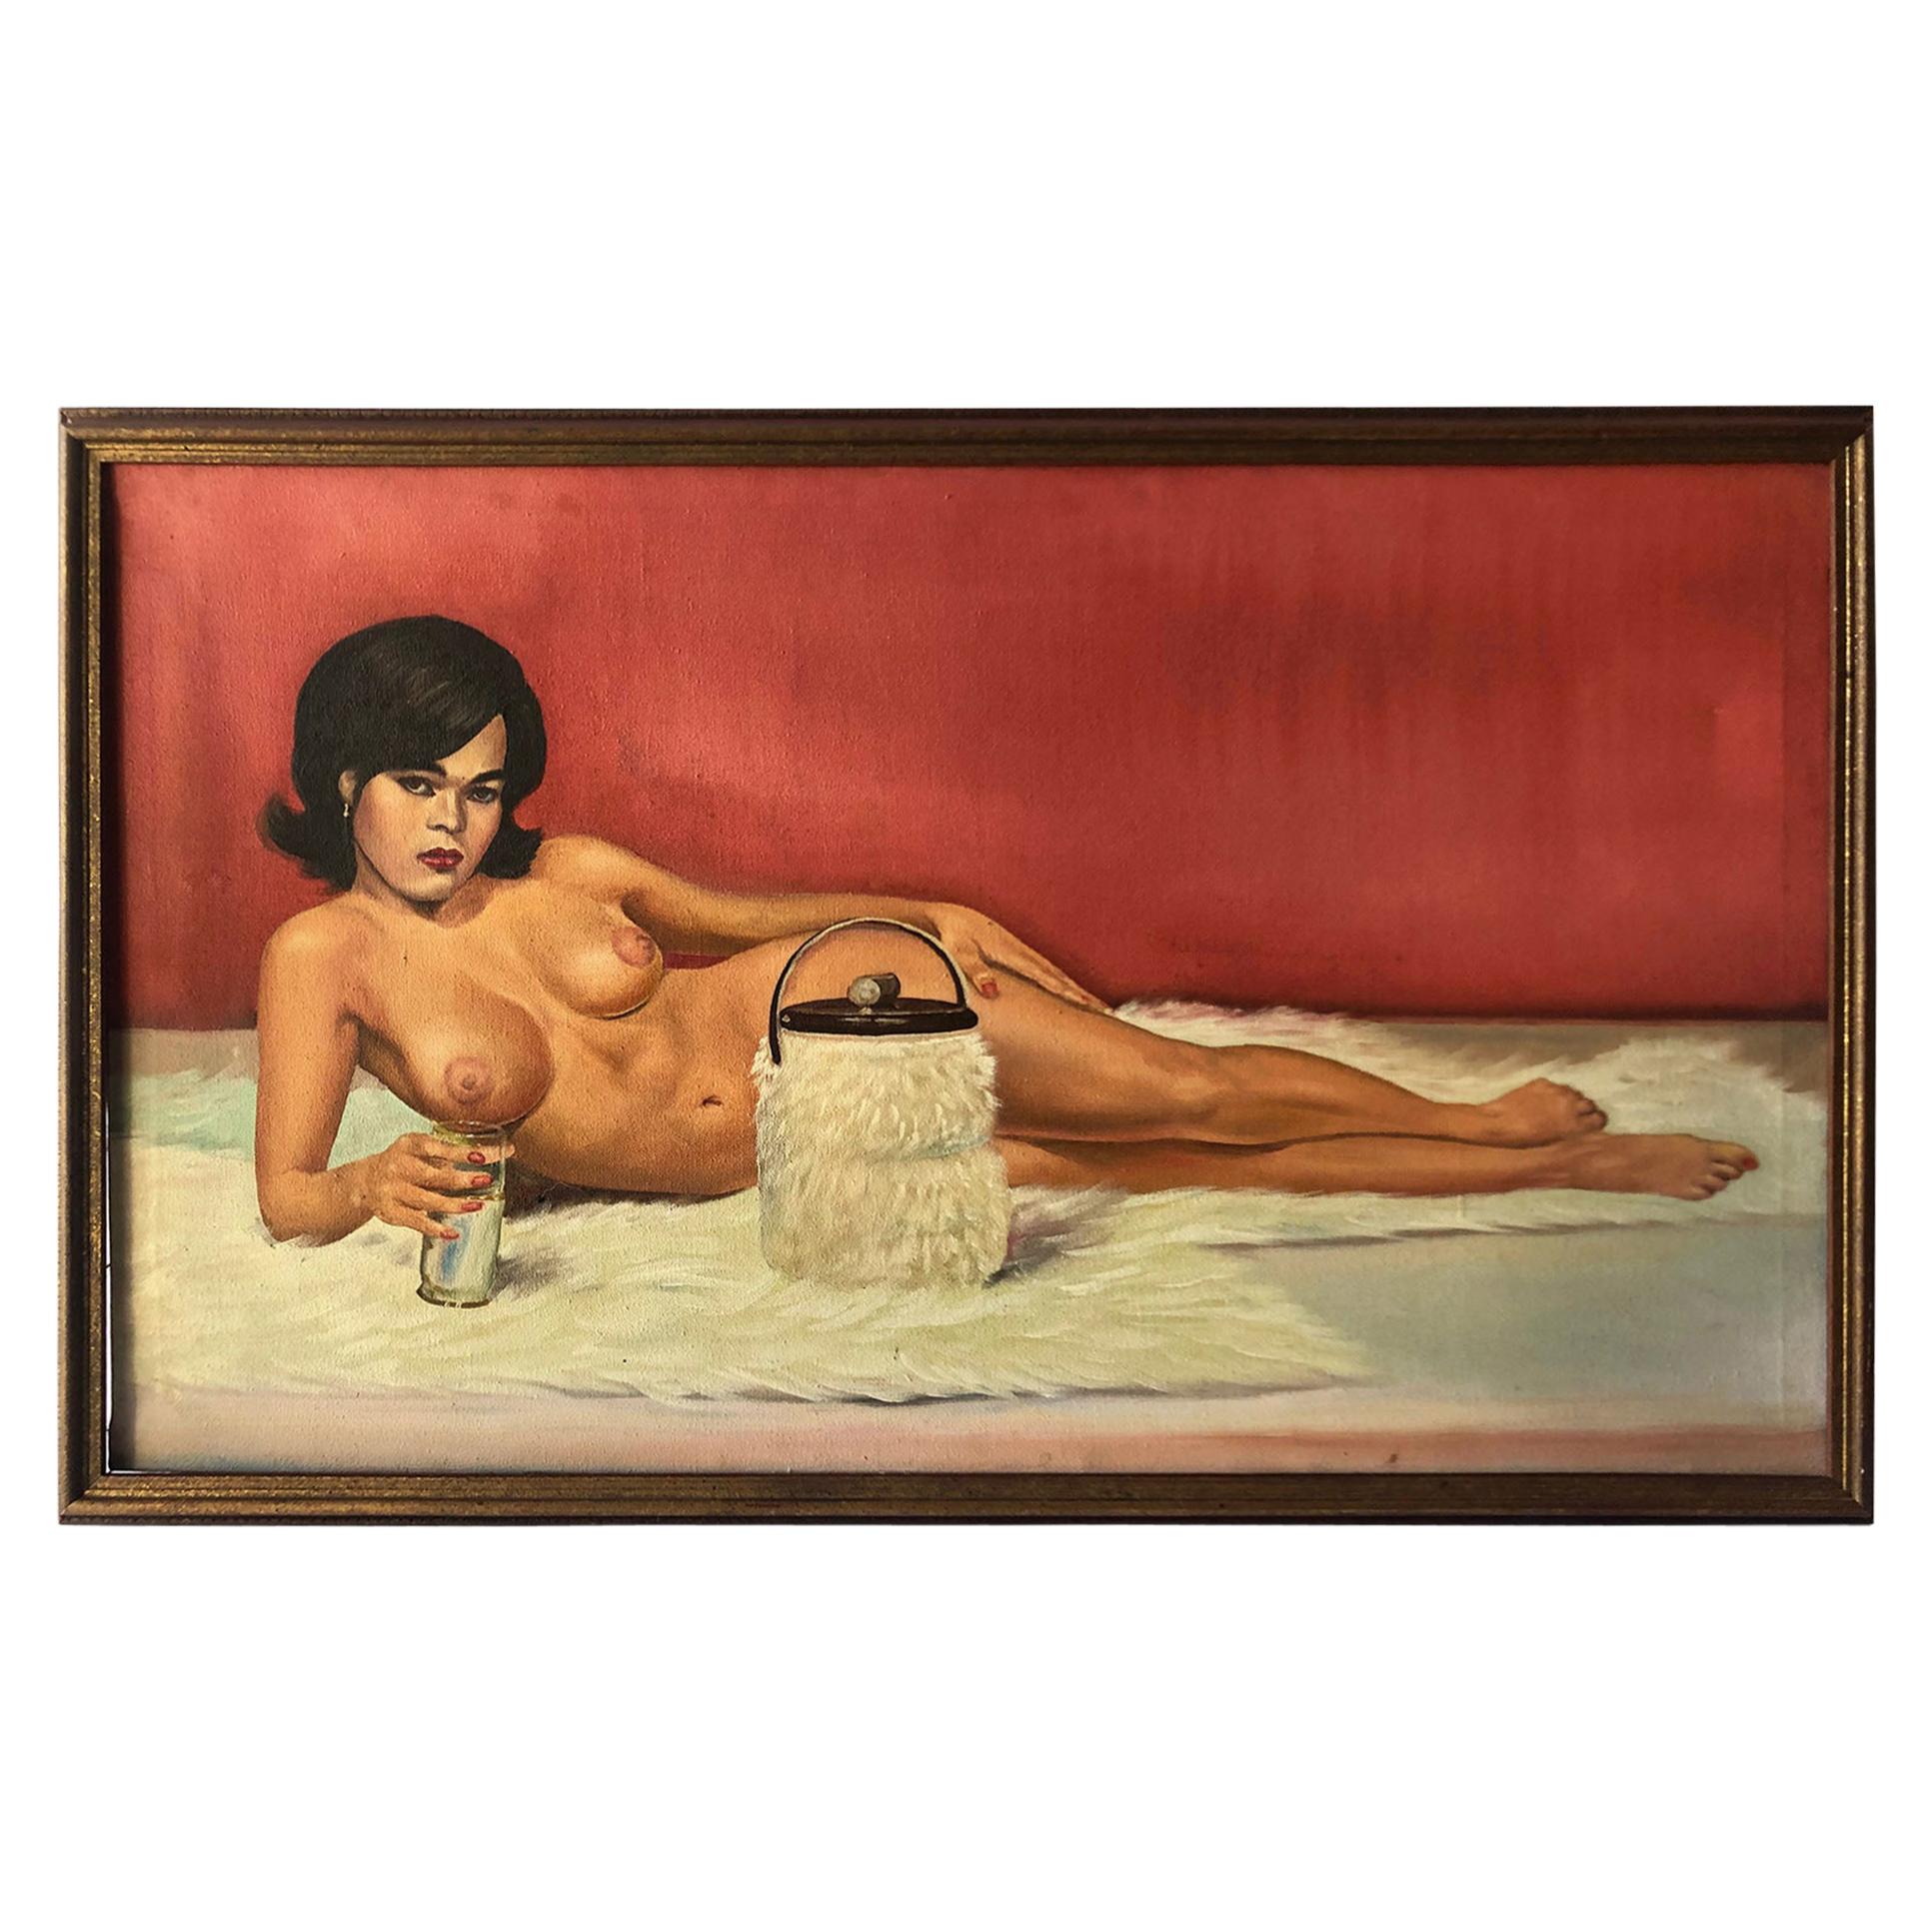 Rare 1960s Vintage Oil on Canvas Reclining Nude Lounge Painting